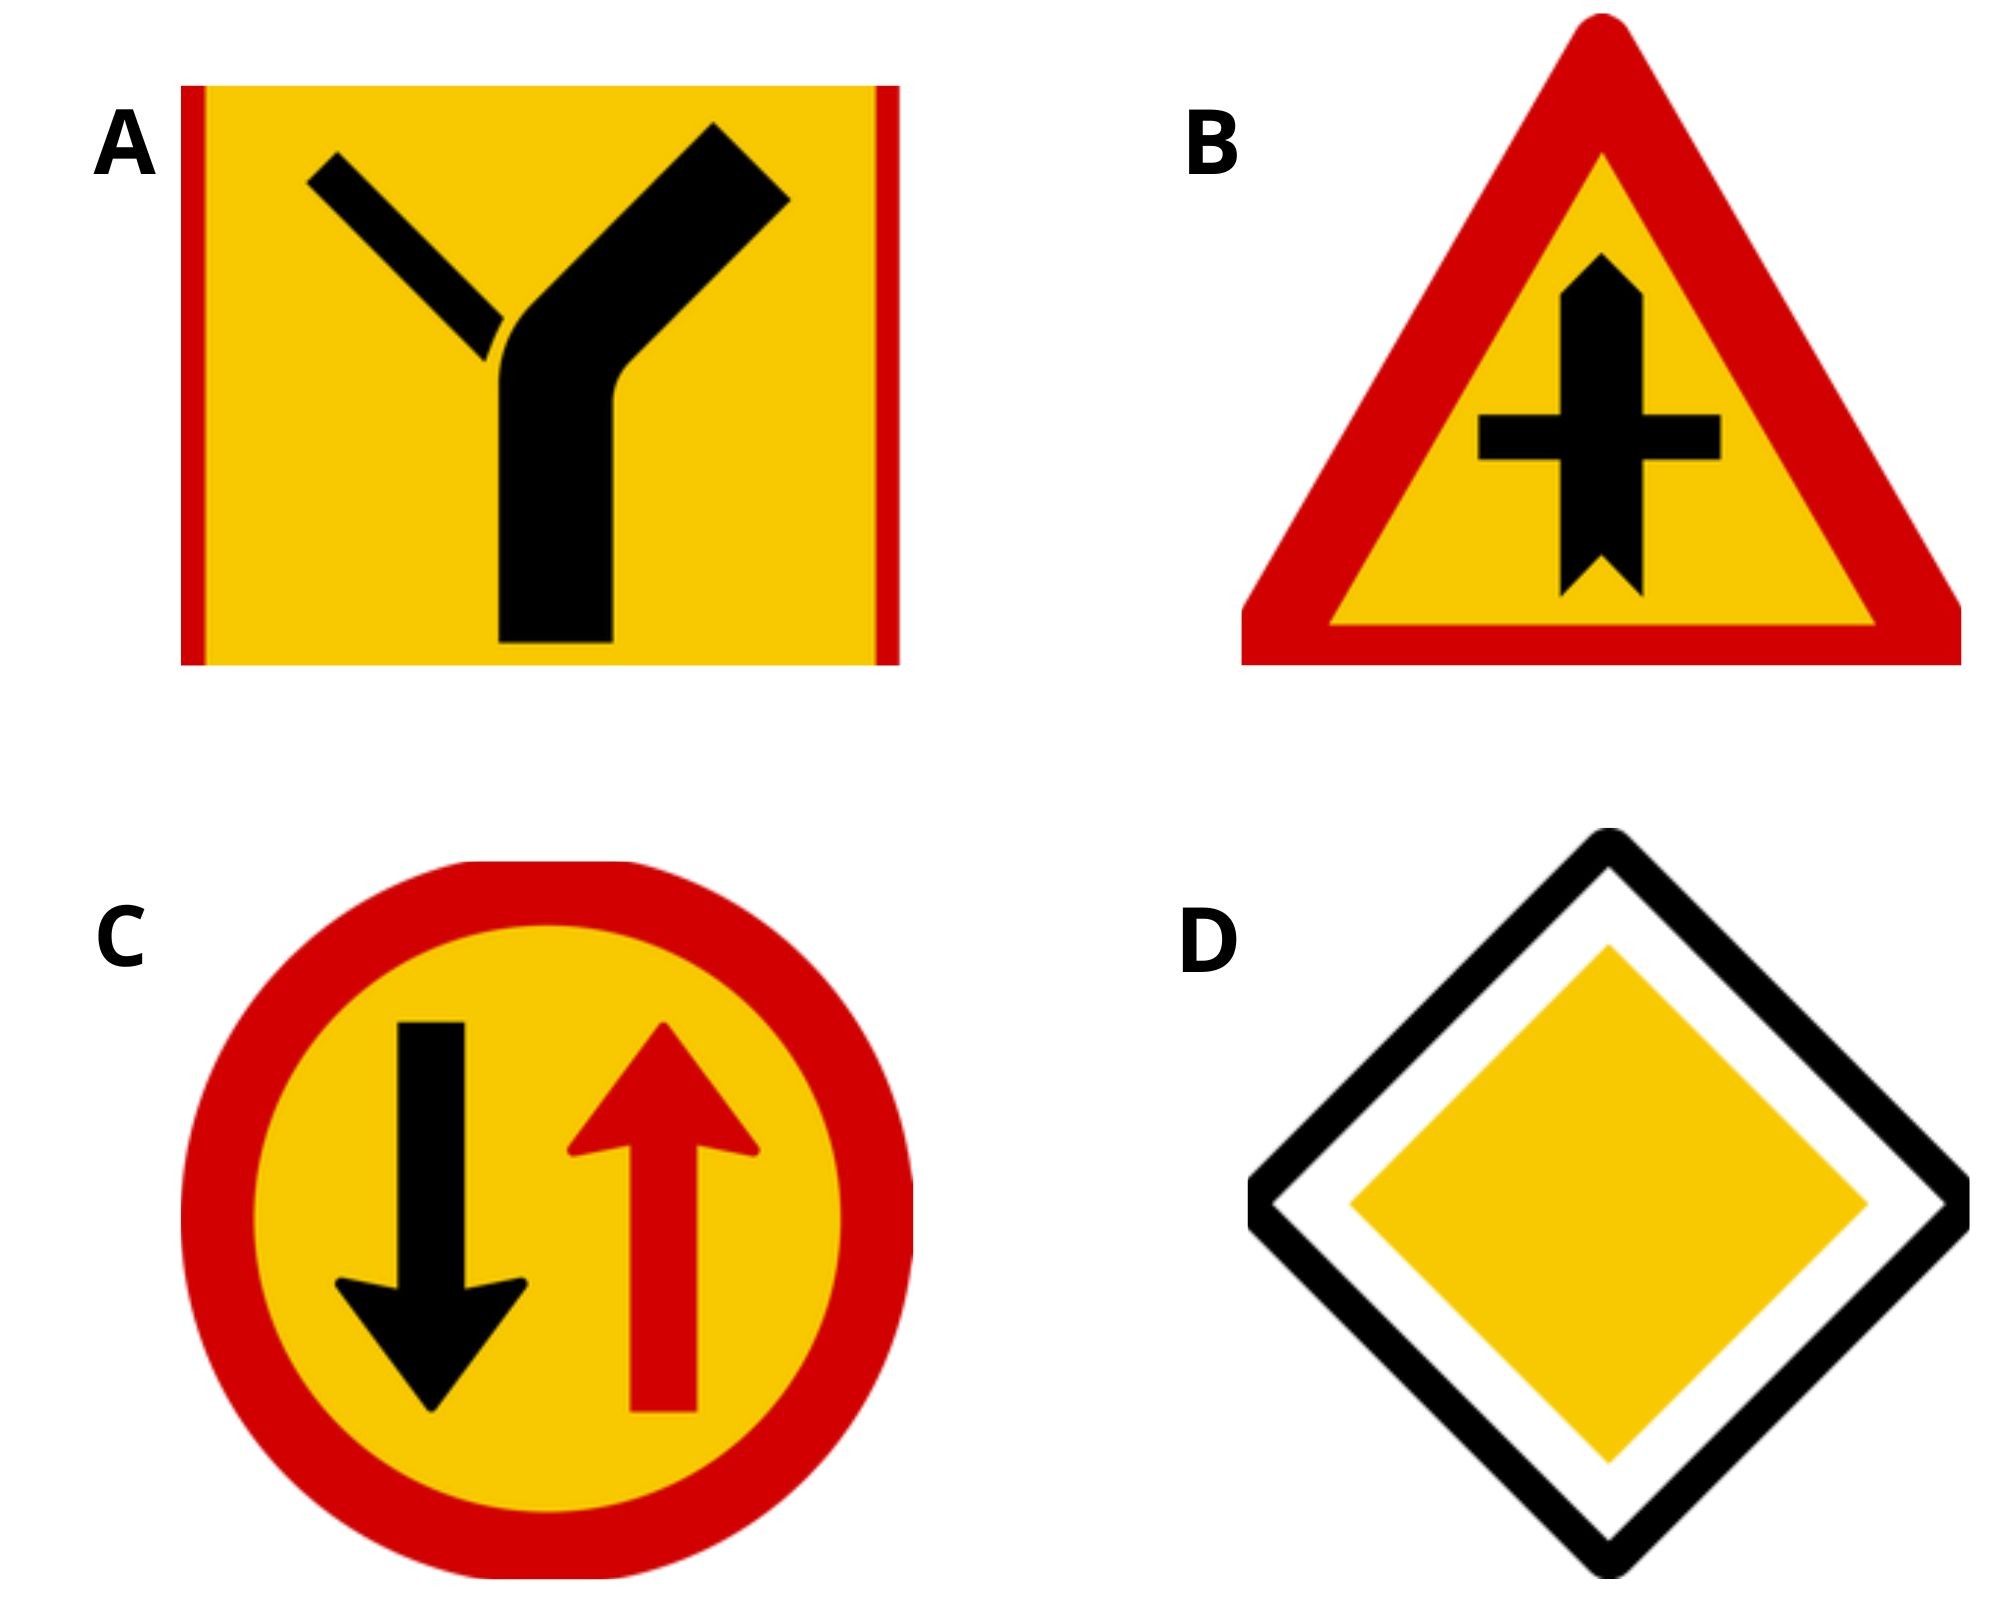 Four road signs